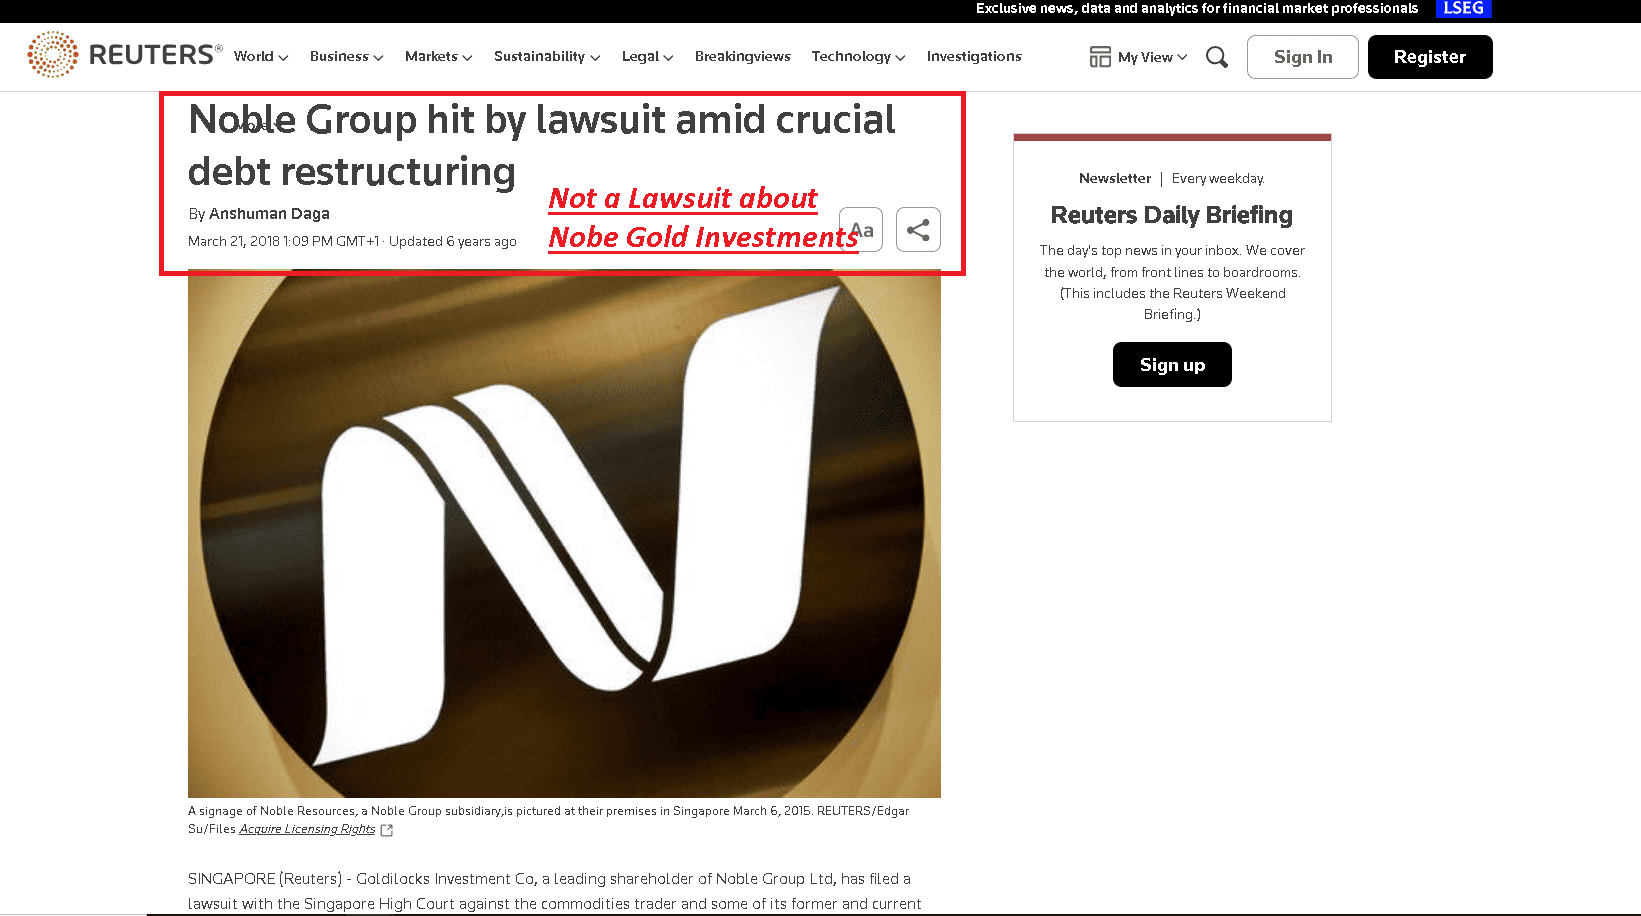 Noble Gold ltd Lawsuit report by Reuters- not an article about Noble Gold Investments